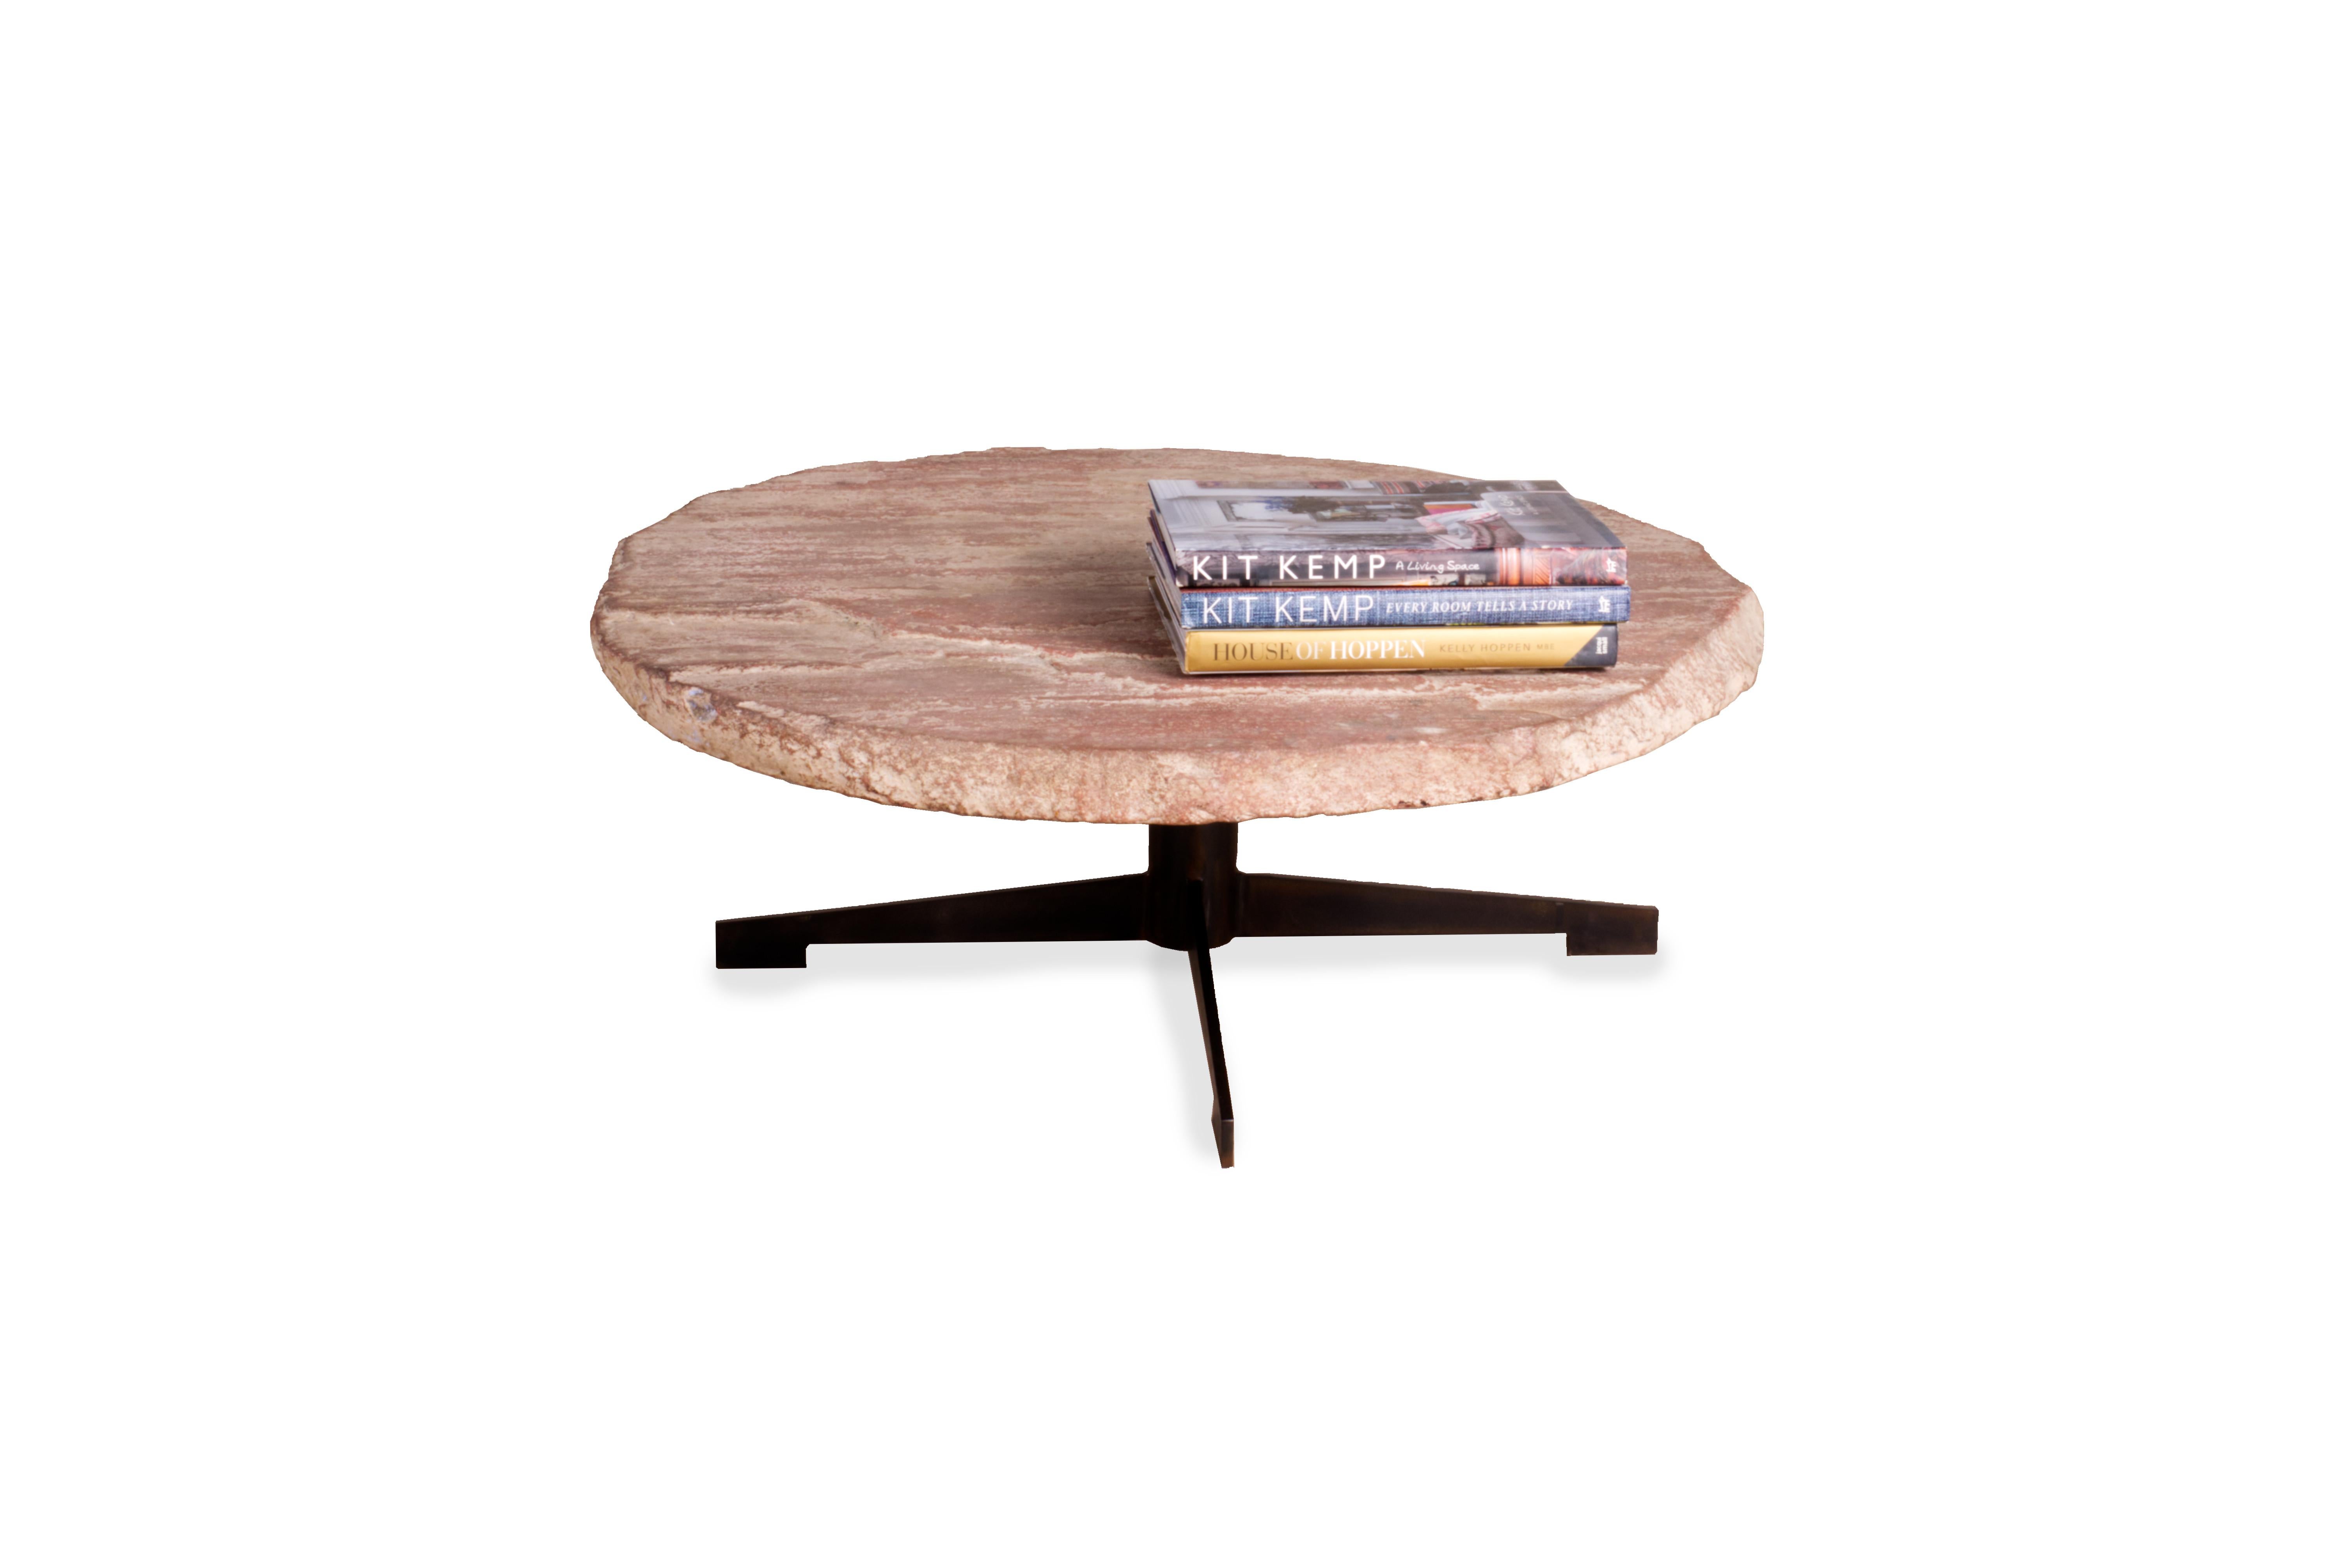 A stunning, modern and creative piece of furniture, this circular tabletop is crafted from chalkstone, a natural material with unique and organic detailing. Set atop an ebonized steel base, this table is perfect for your home. For a chic coffee